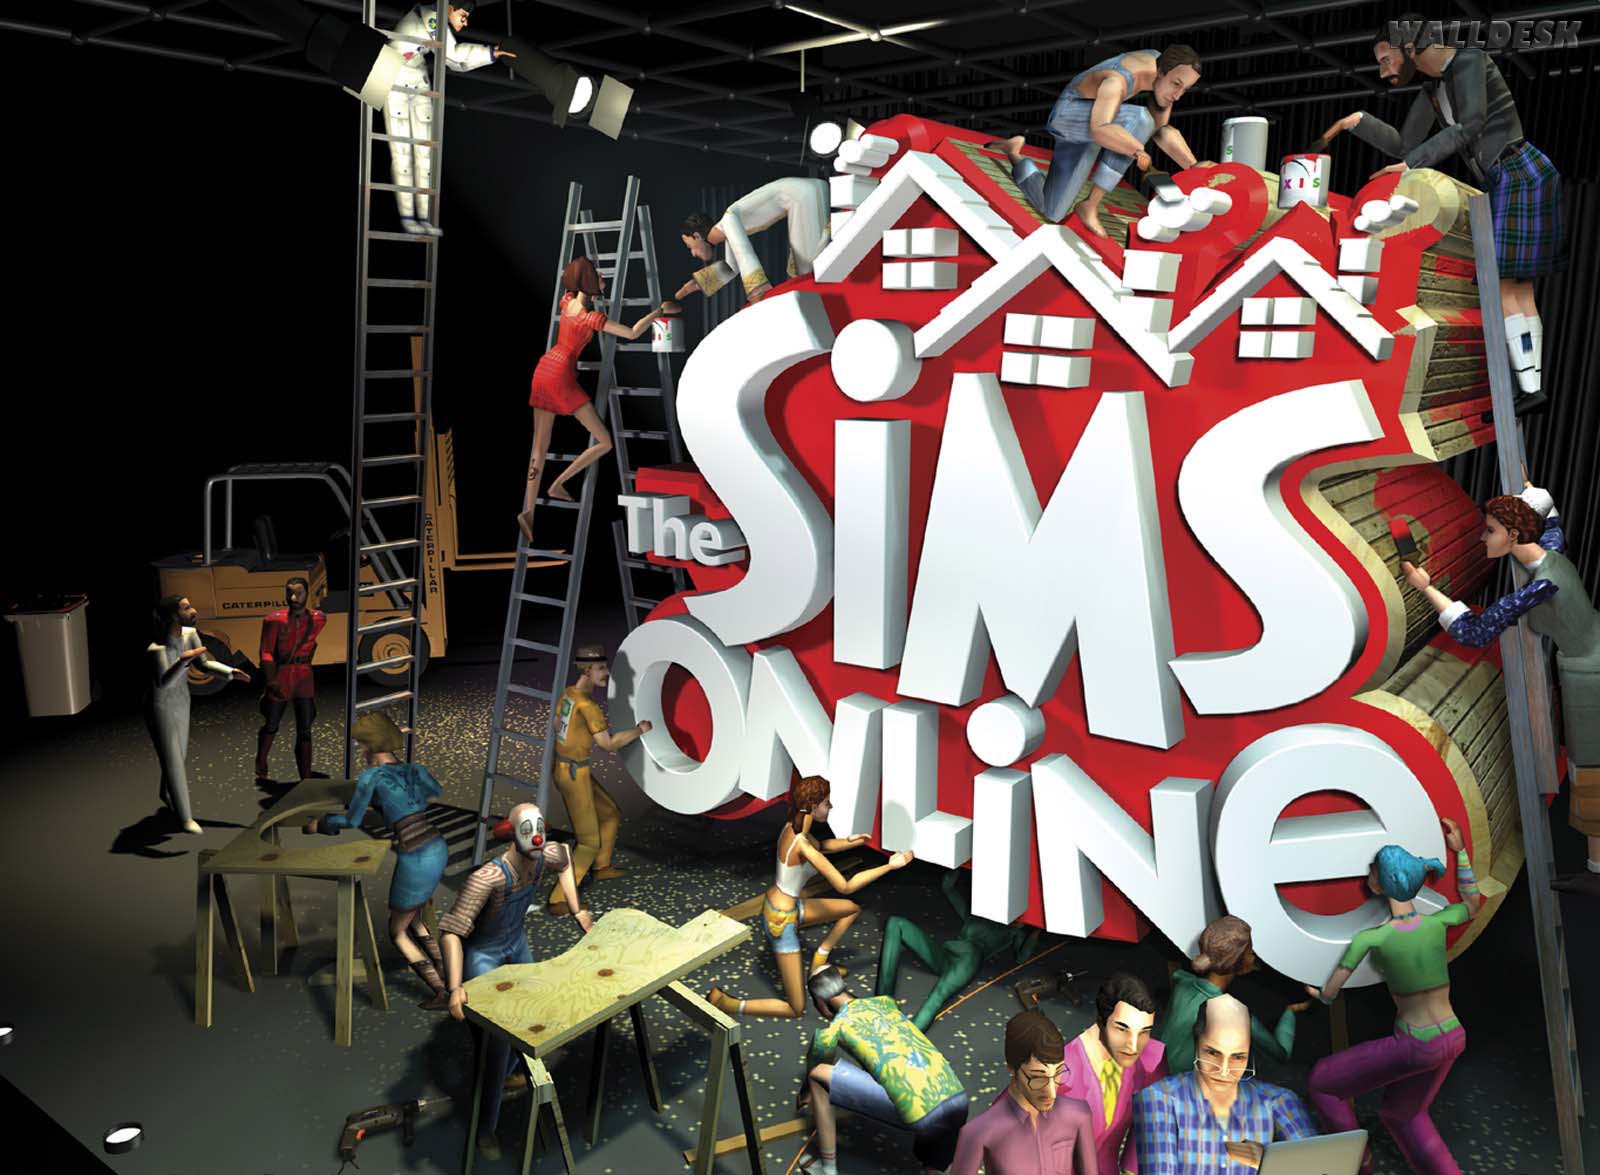 Play The Sims Online for Free - BeyondSims